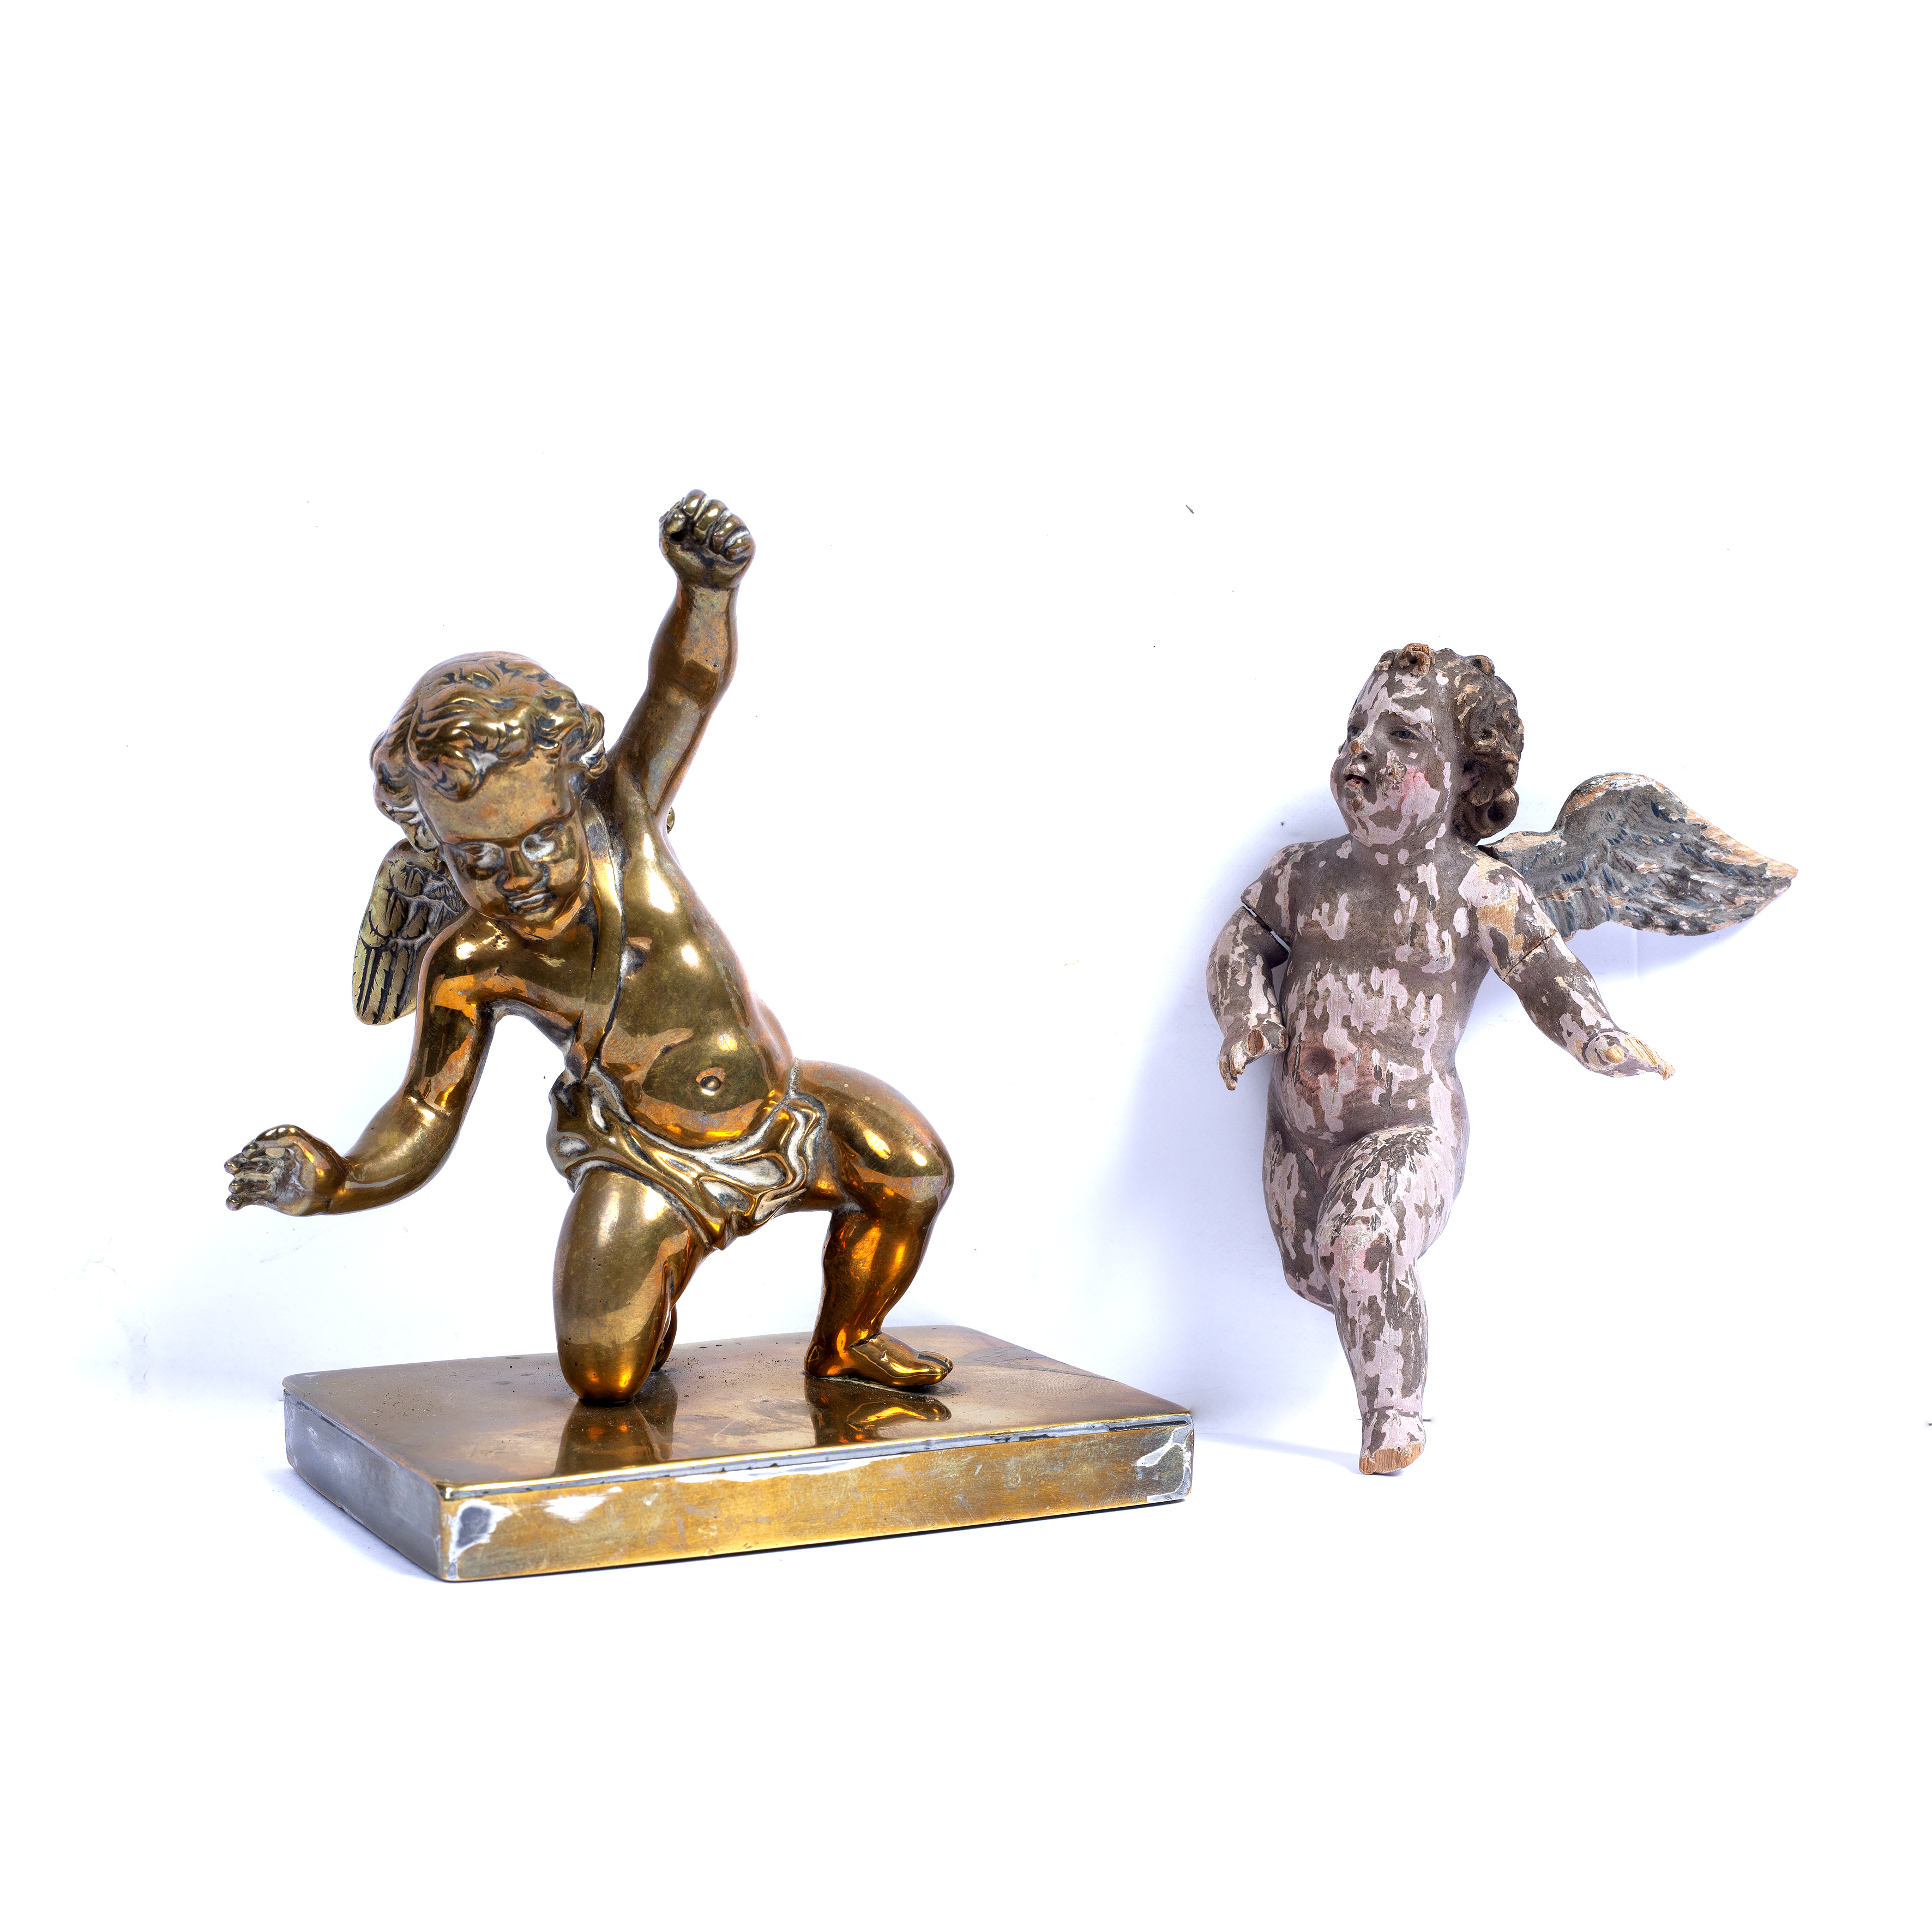 A polished bronze paperweight in the form of a cherub, 13cm high and an antique carved wooden